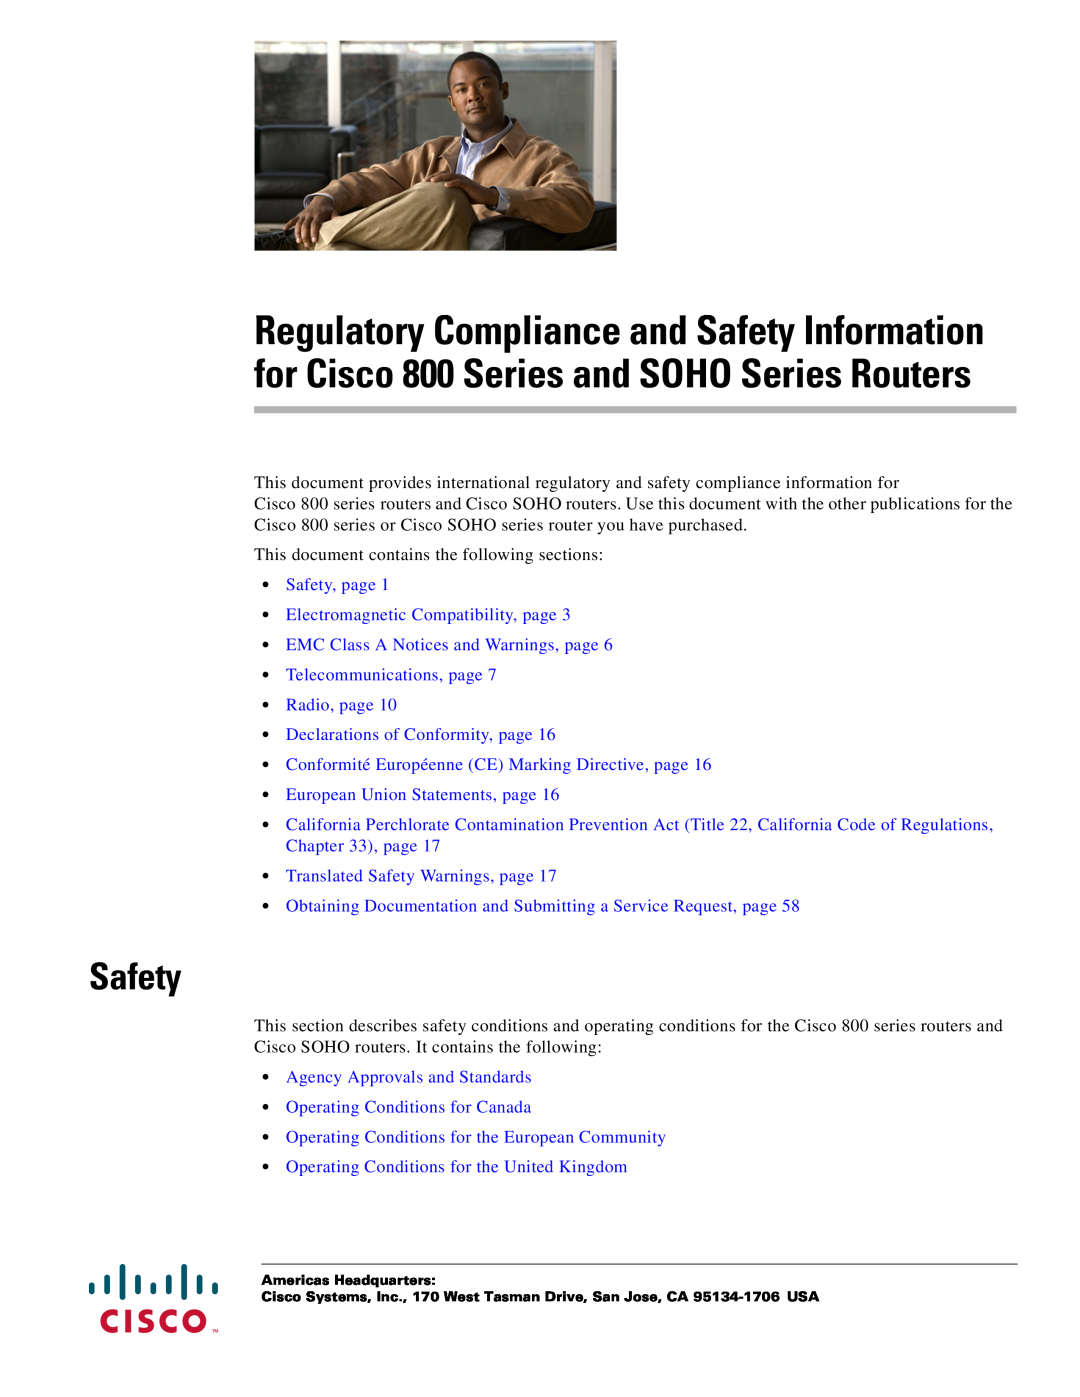 Cisco Systems SOHO Series manual Safety, page Electromagnetic Compatibility, page, European Union Statements, page 